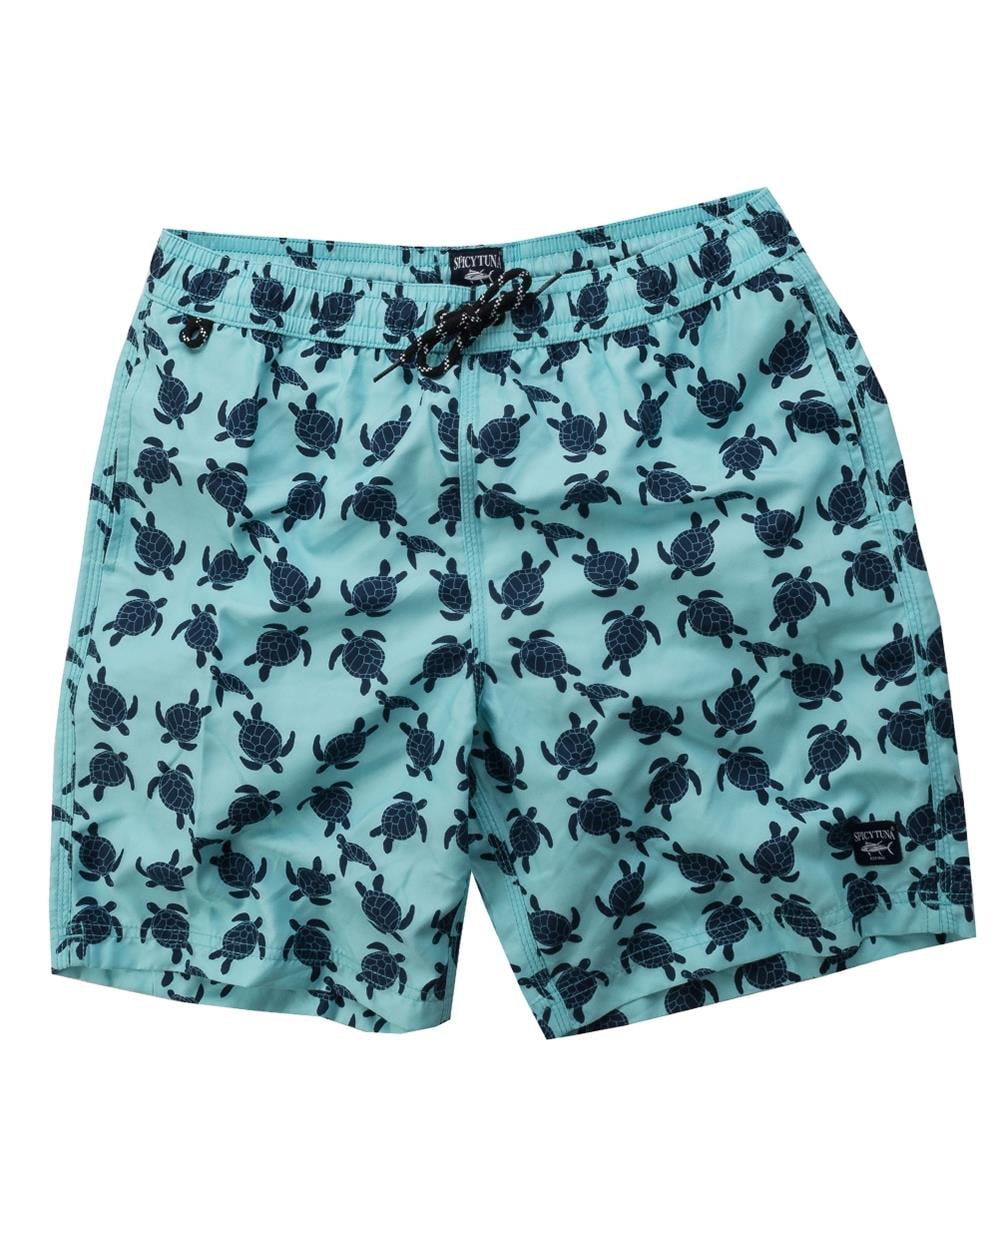 Turtle Day sea Turtle Art Poster Beachwear Shorts for Men Bathing Suit Breathable Swimming Trunks